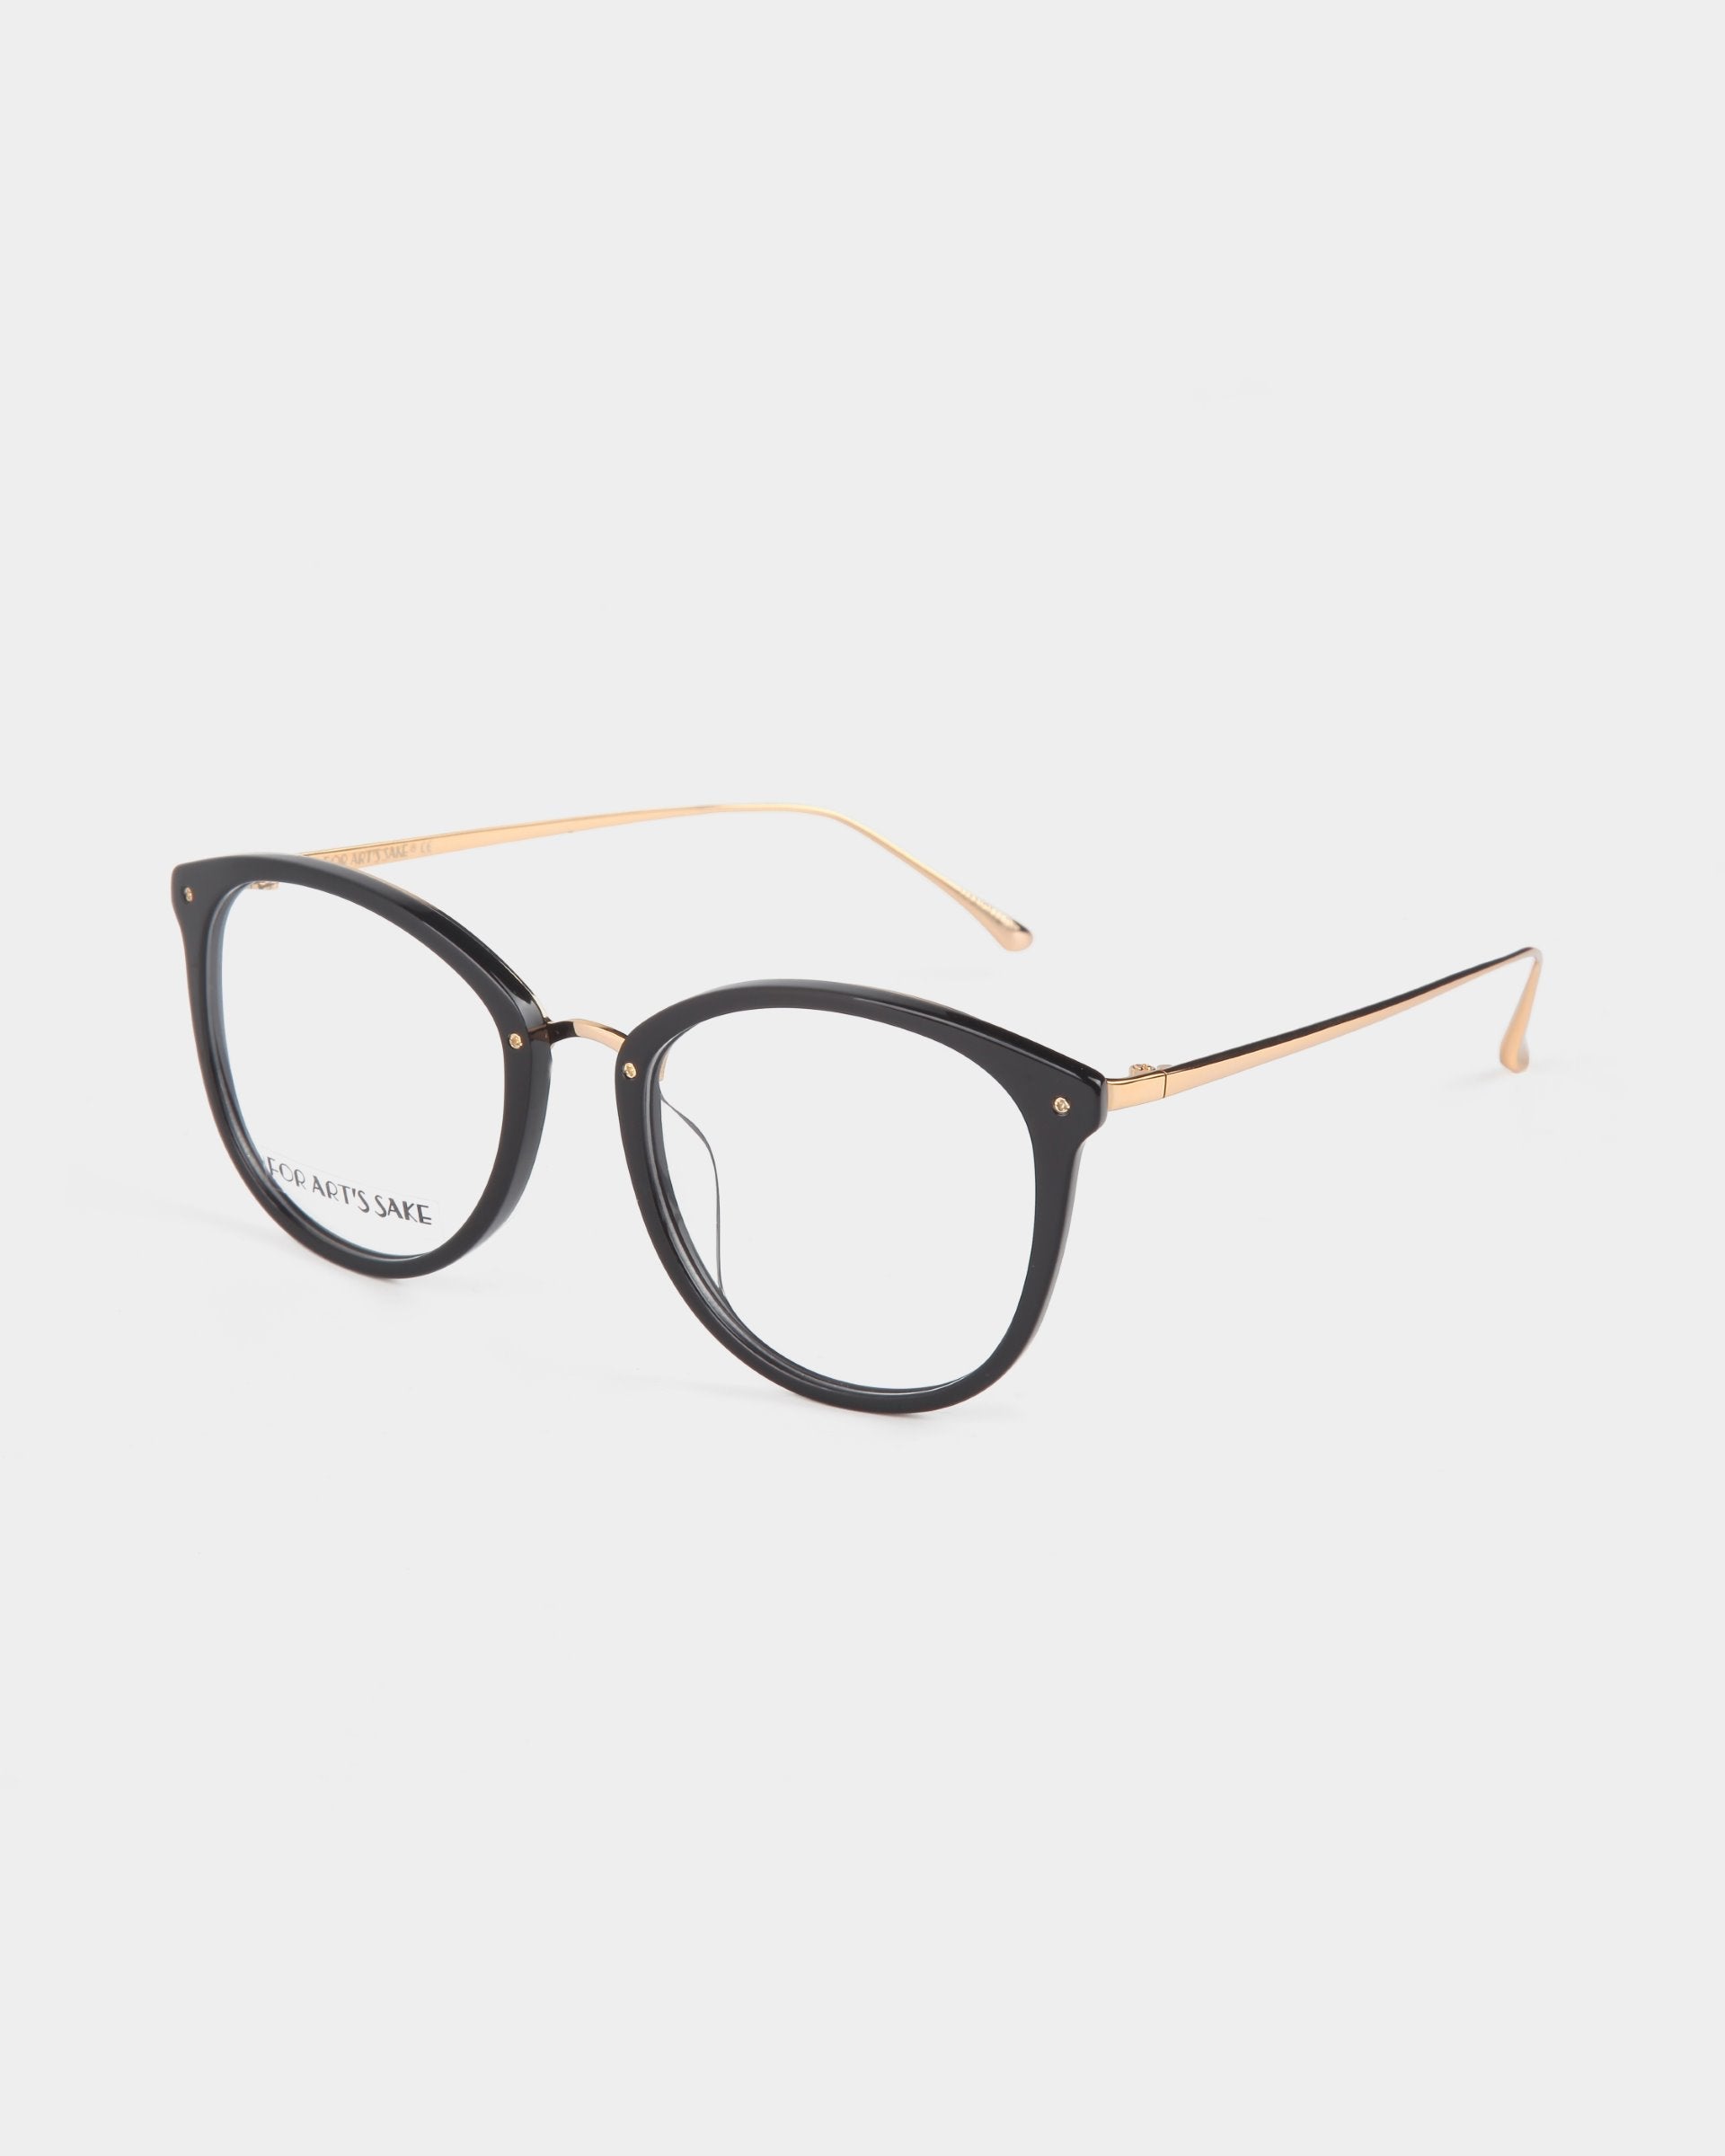 A pair of stylish Club eyeglasses by For Art&#39;s Sake® with black round frames and thin gold temples, featuring the left lens displaying the brand name in small font. These eyeglasses, offering blue light filter technology, are placed against a plain white background.